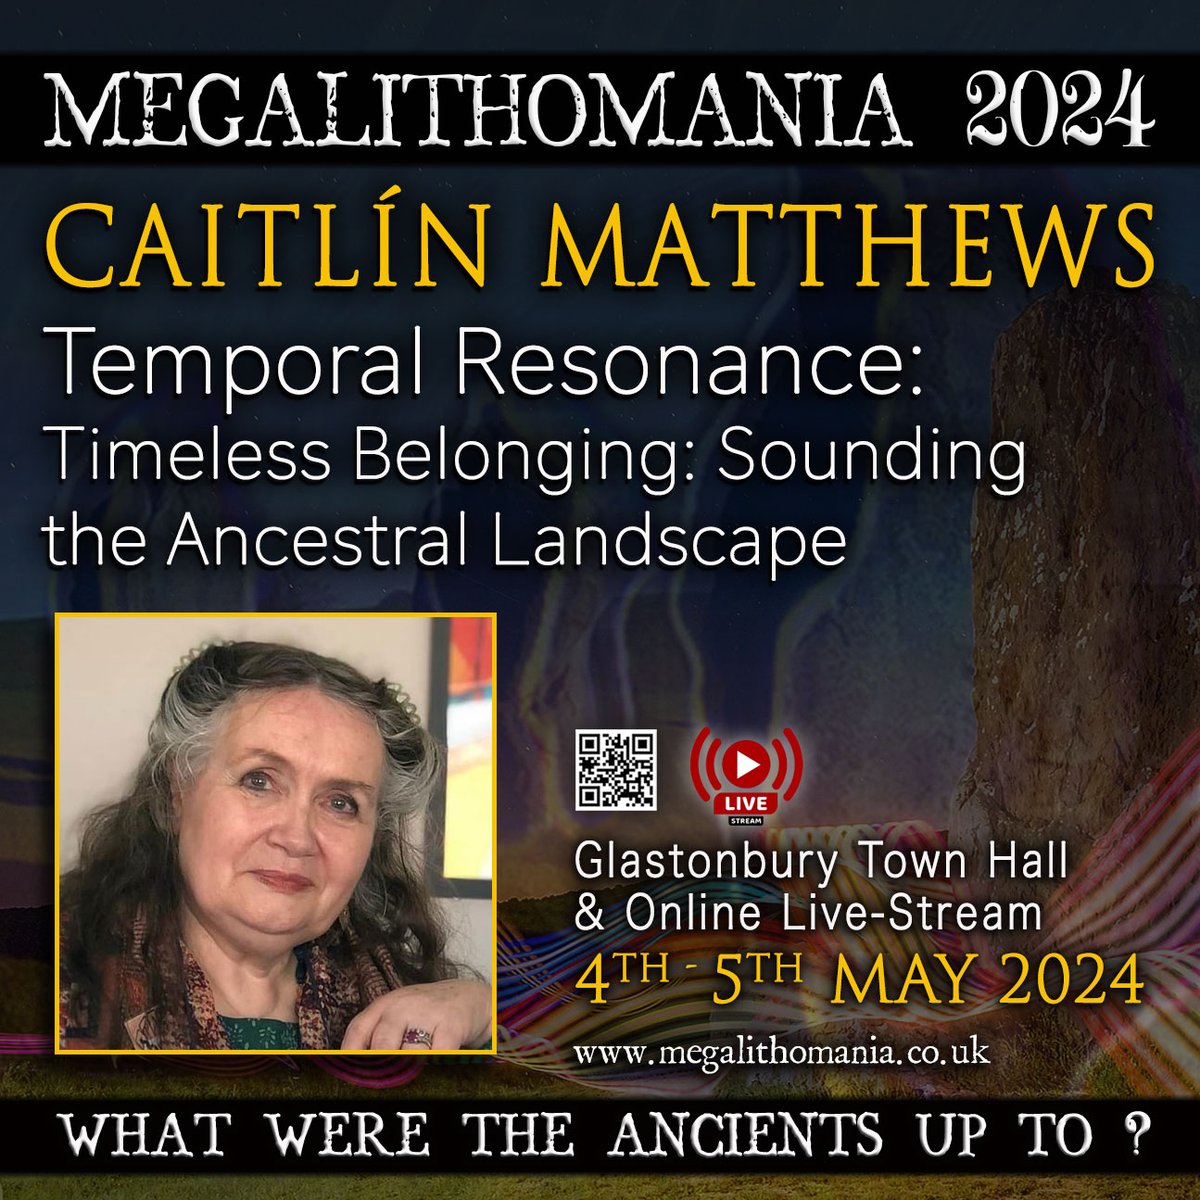 Caitlín Matthews - Temporal Resonance, Timeless Belonging: Sounding the Ancestral Landscape, presentation at the Megalithomania Conference 2024, Glastonbury Town Hall, 4th - 5th May + live-stream. megalithomania.co.uk/booking.html #megalithomania #ancient #Caitlínmatthews #glastonbury